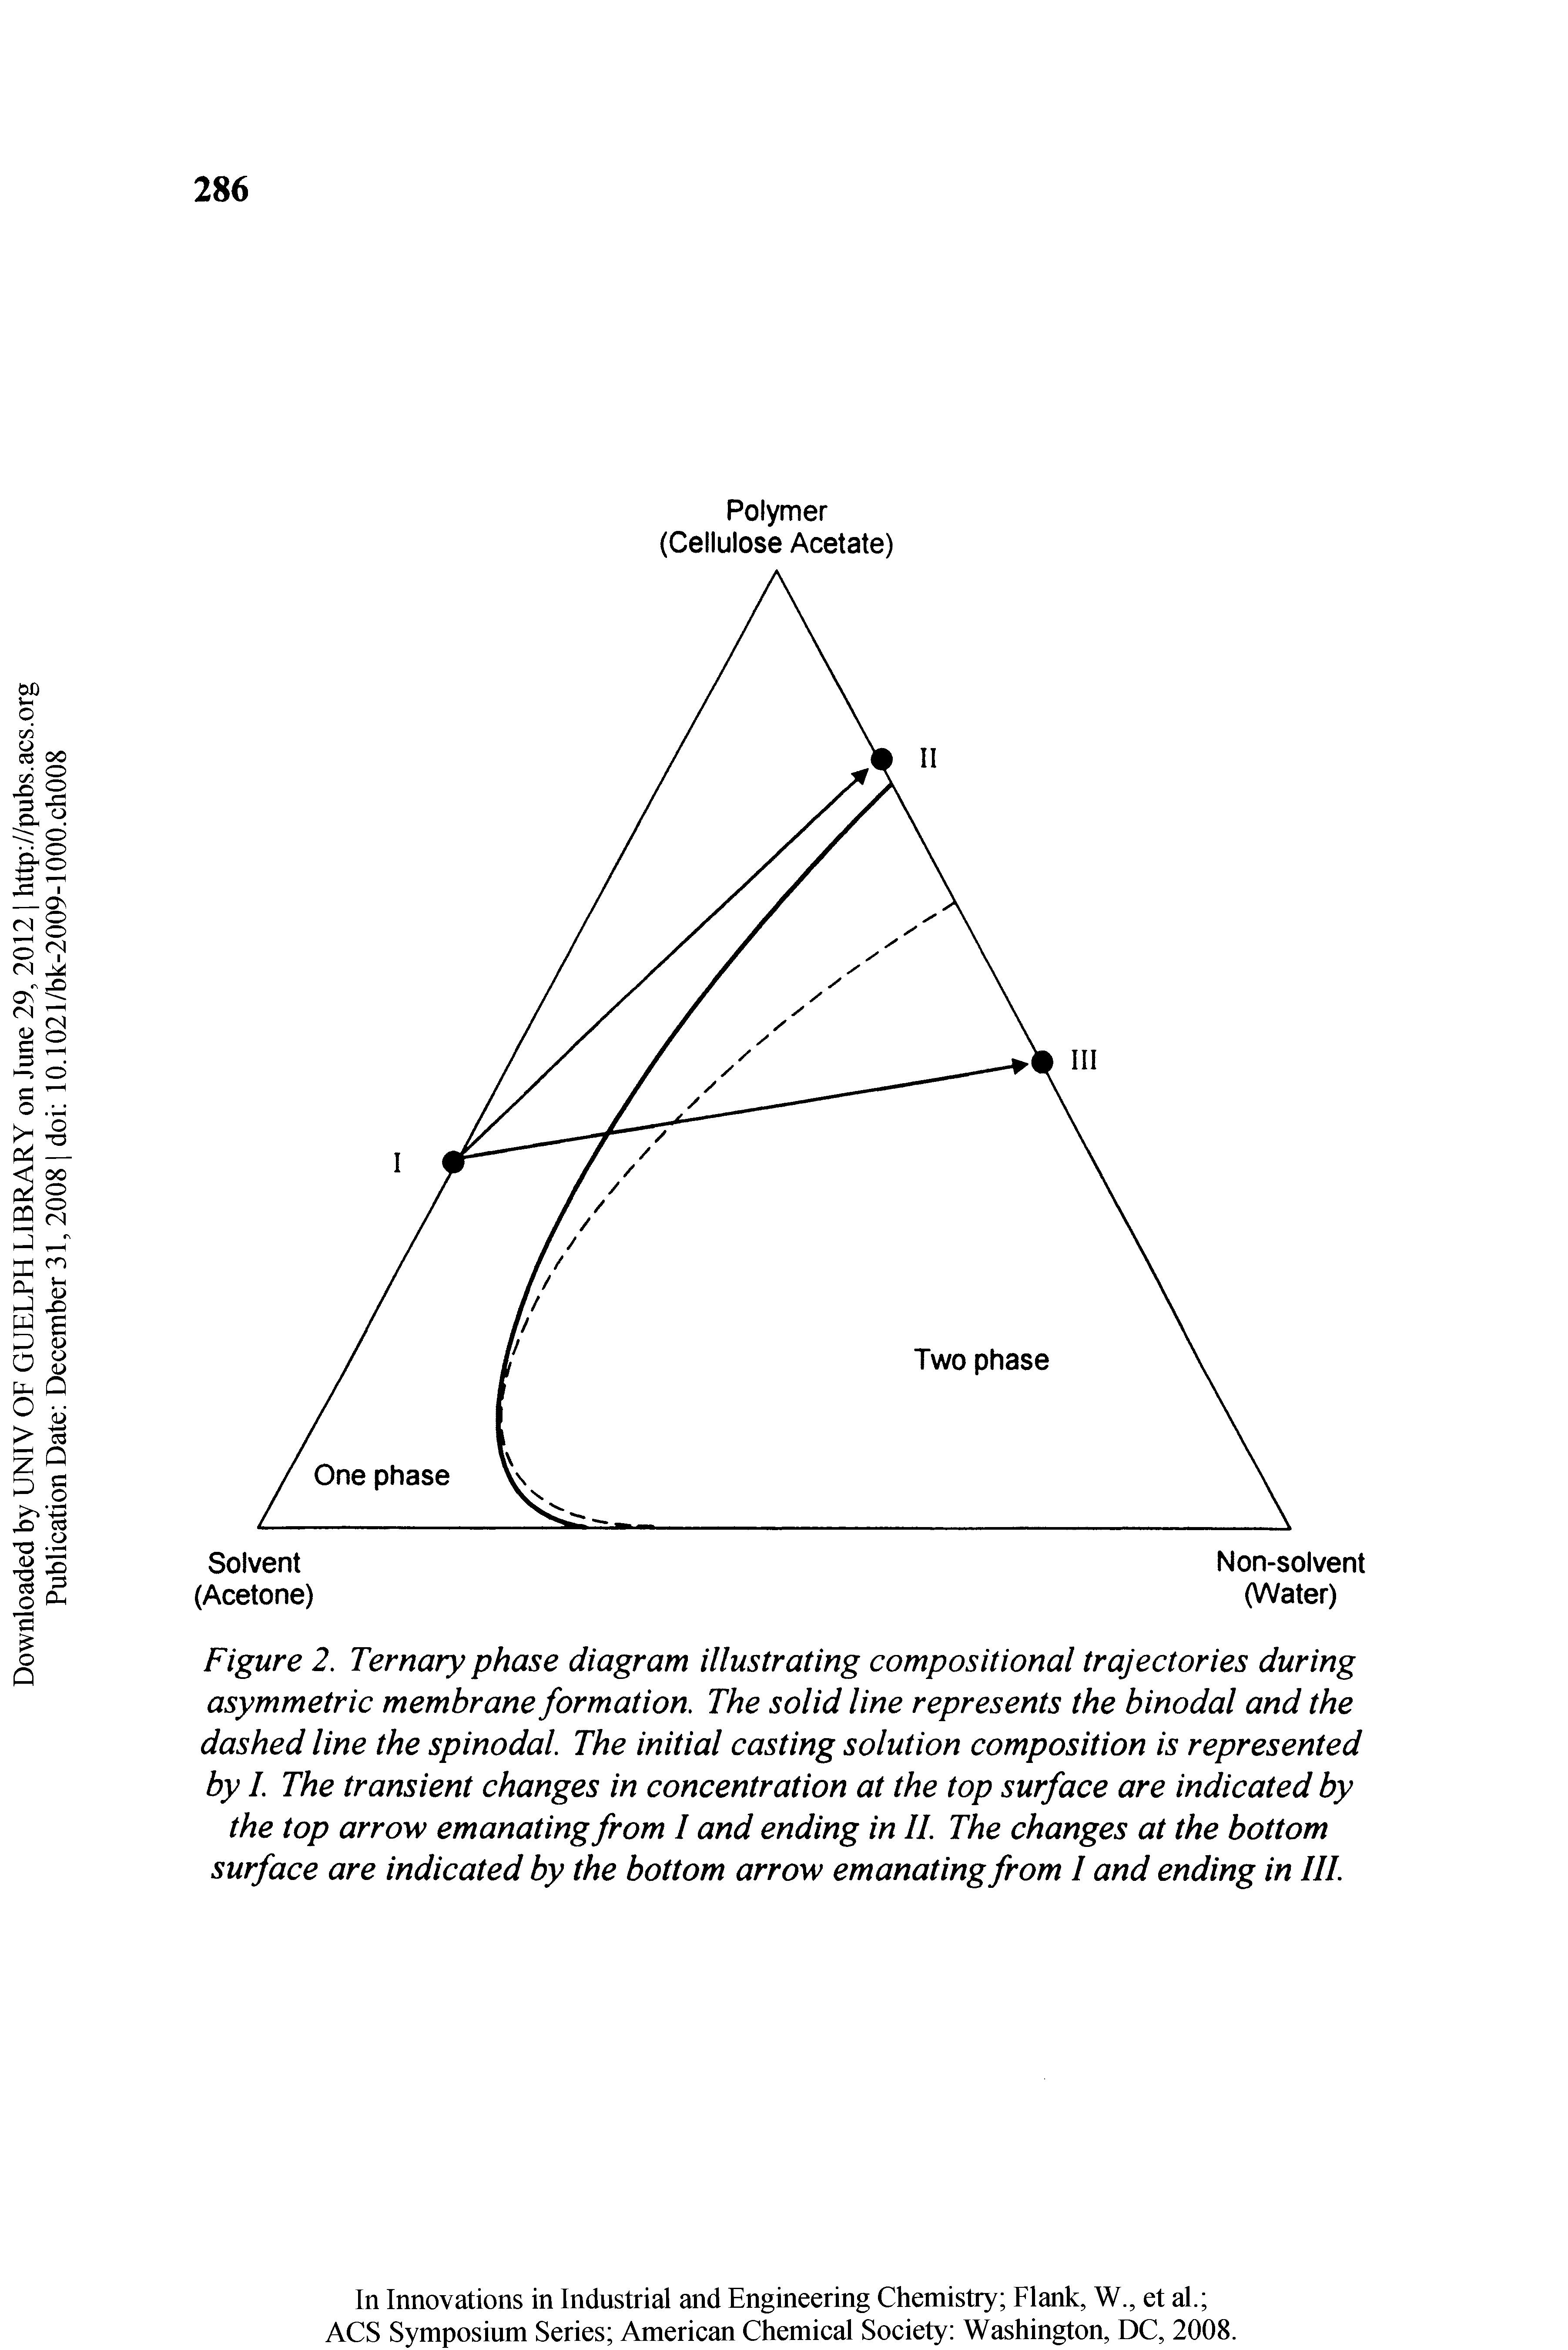 Figure 2. Ternary phase diagram illustrating compositional trajectories during asymmetric membrane formation. The solid line represents the binodal and the dashed line the spinodal. The initial casting solution composition is represented by I. The transient changes in concentration at the top surface are indicated by the top arrow emanating from I and ending in II. The changes at the bottom surface are indicated by the bottom arrow emanating from I and ending in III.